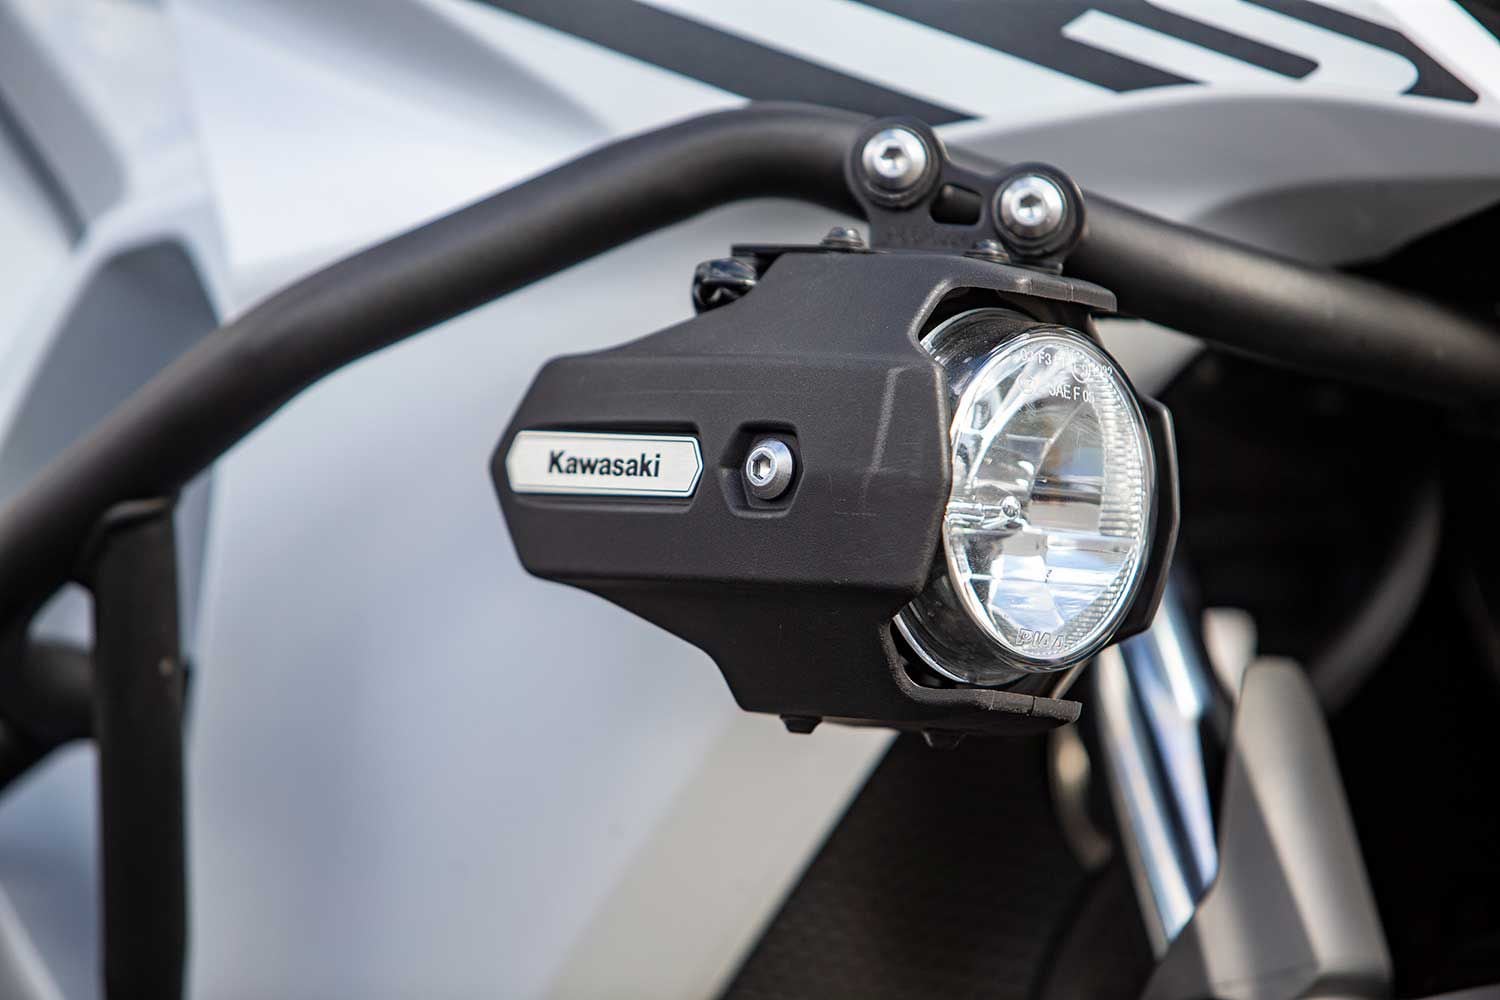 Our test unit came equipped with various accessories from Kawasaki’s catalog, including these LED auxiliary lights ($409.95). These units offer an extra breadth of illumination, particularly at low speeds.